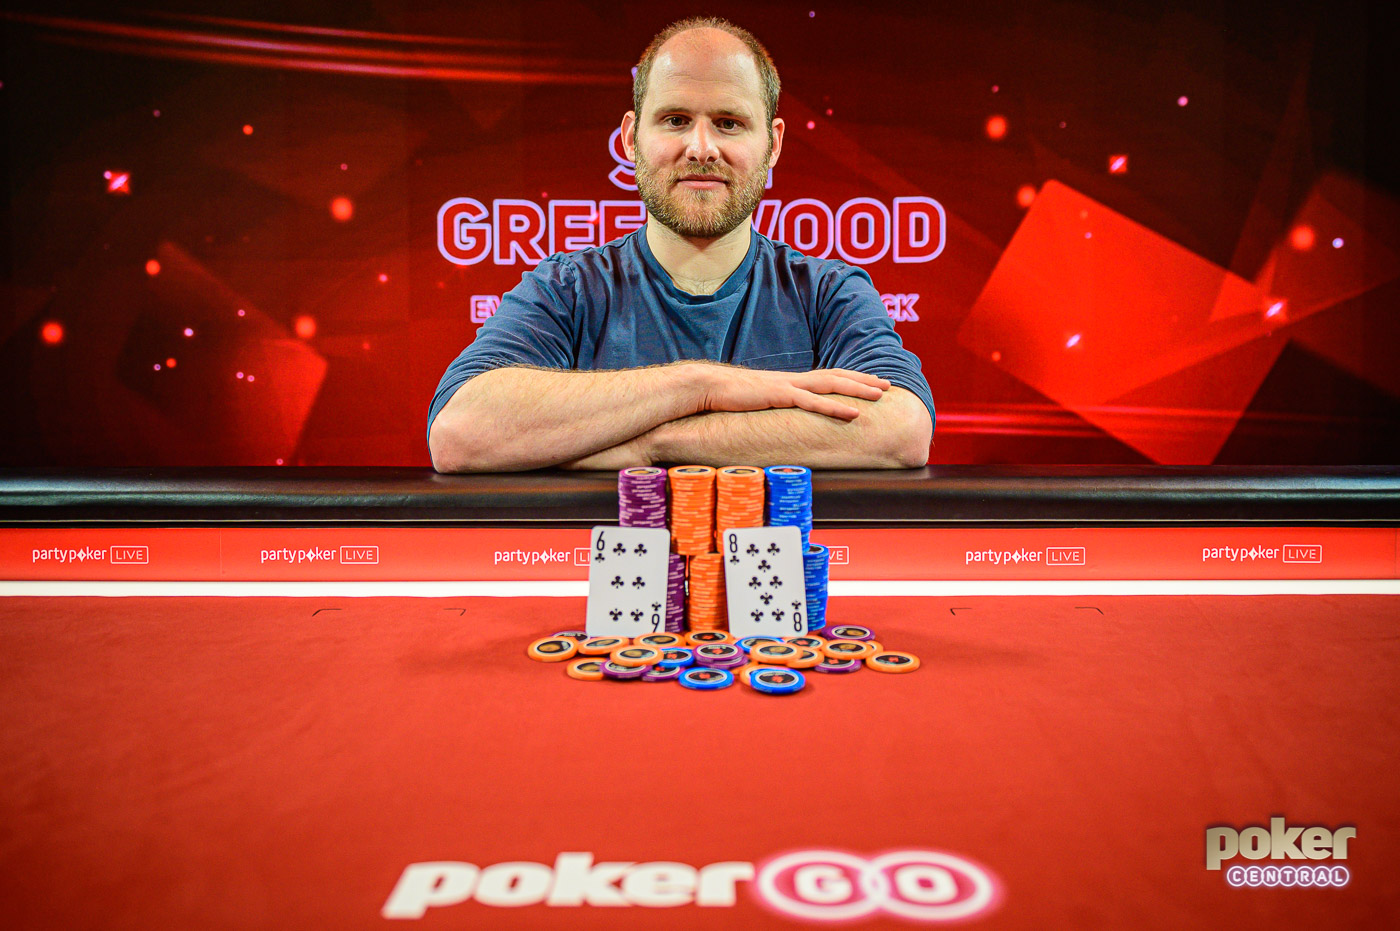 Sam Greenwood ads another win to the Greenwood family poker resume!